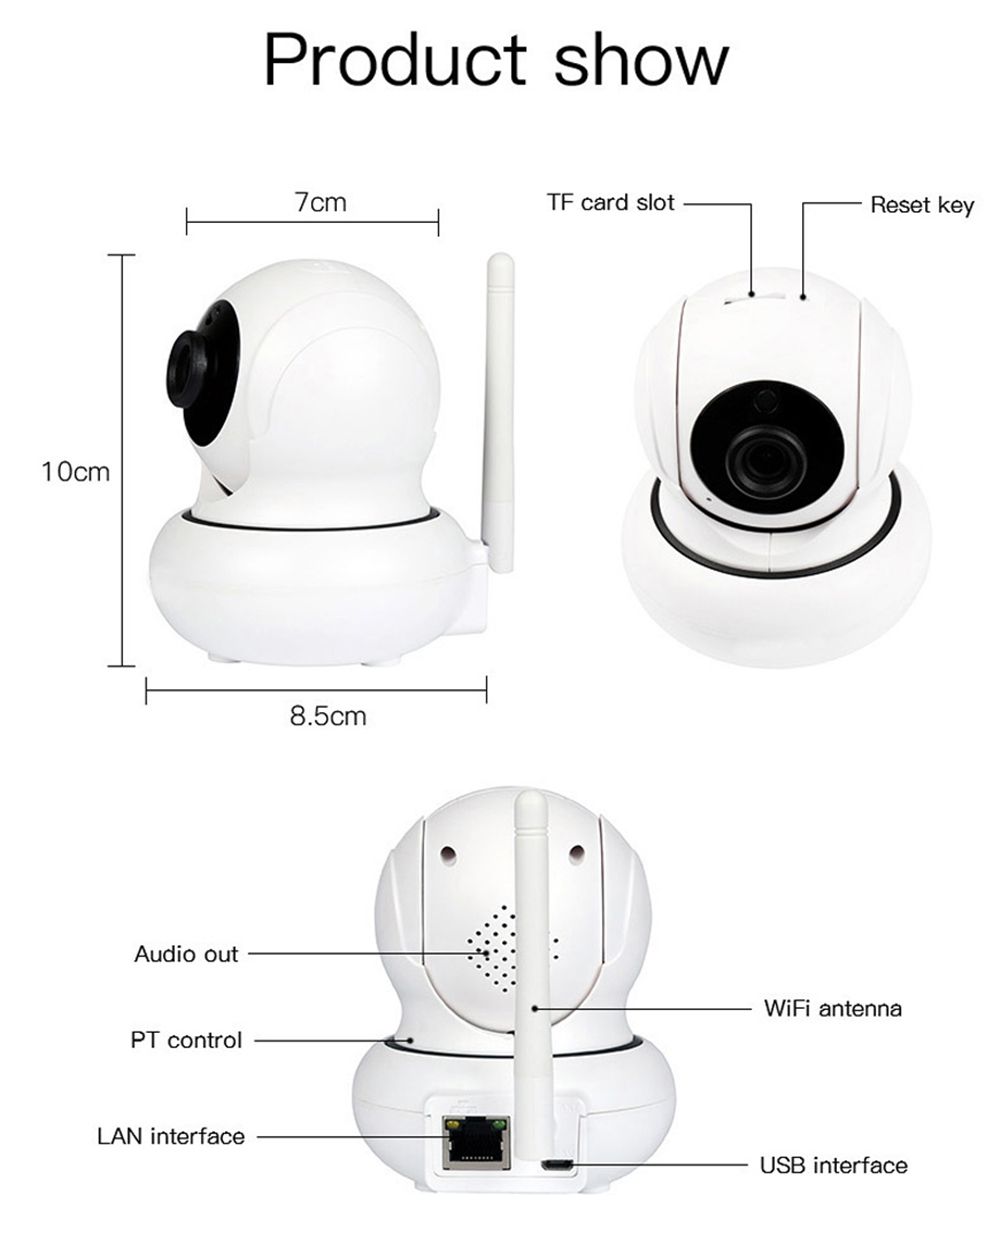 Wanscam-K21-1080P-WiFi-IP-Camera-3X-Zoom-Face-Detection-Camera-P2P-Baby-Monitor-Video-Recorder-1392969